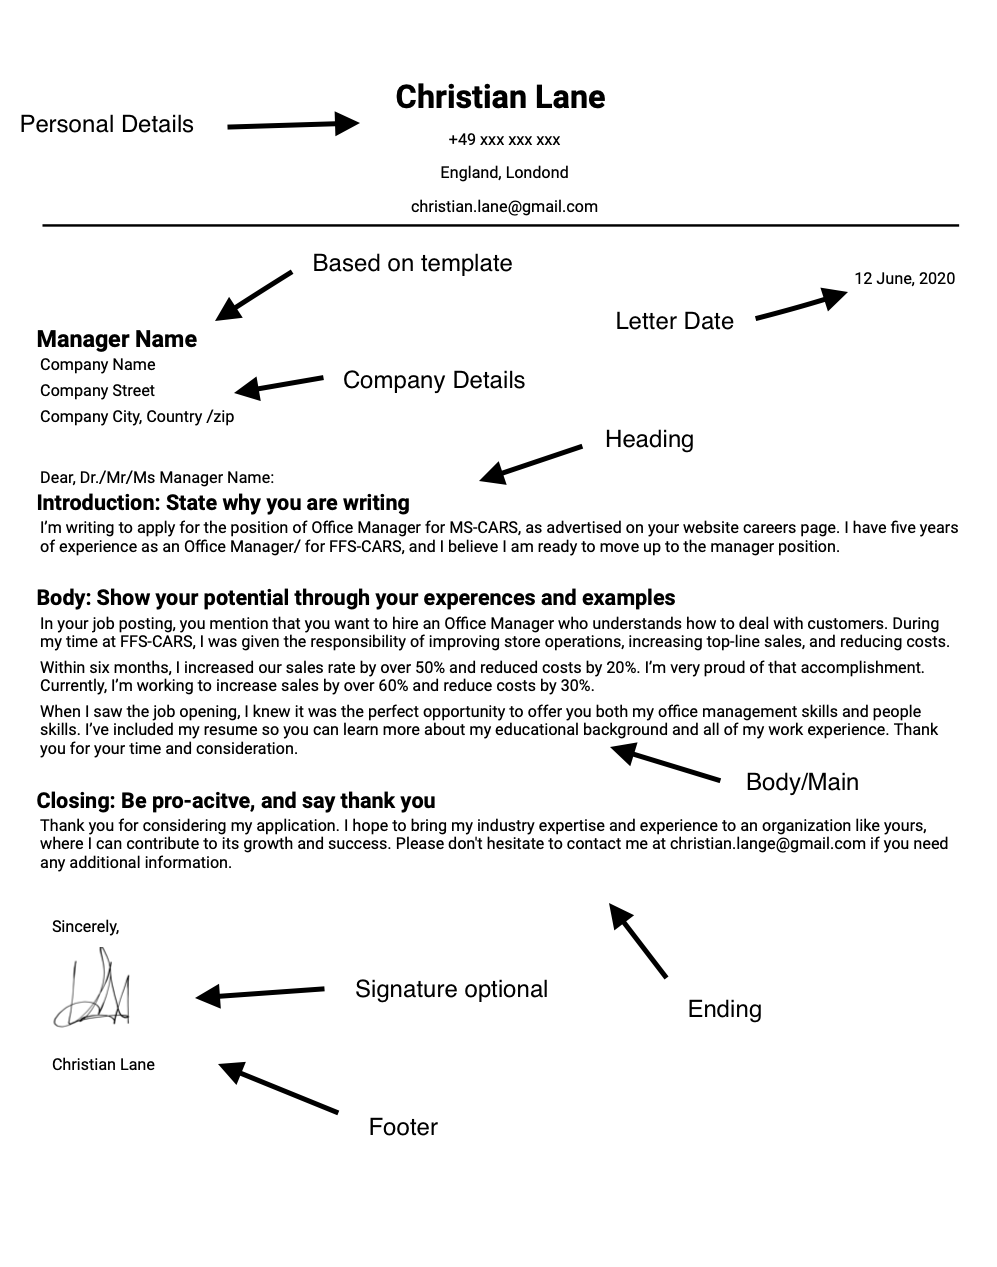 Simple CV cover letter example